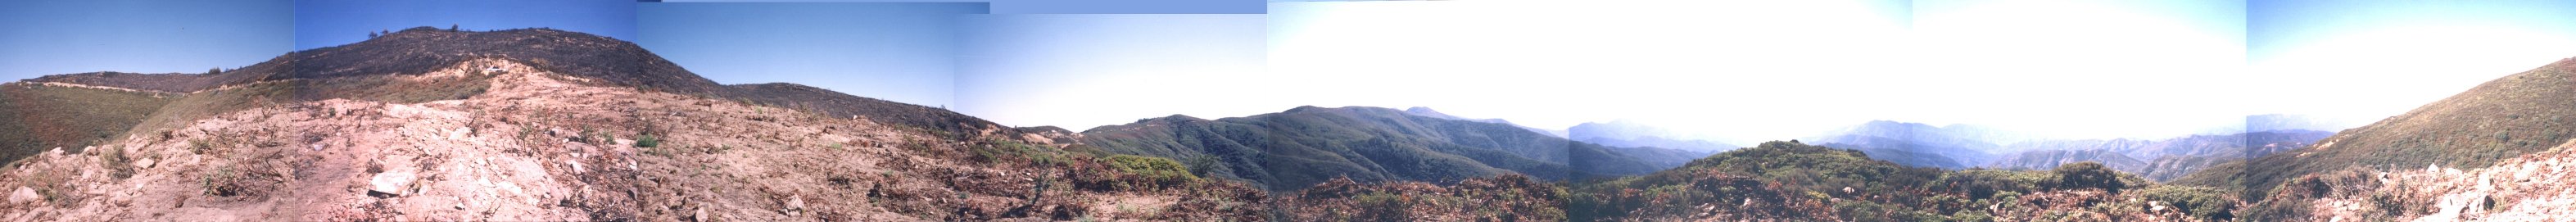 360-degree panorama standing at the confluence point (thumbnail is a partial view)